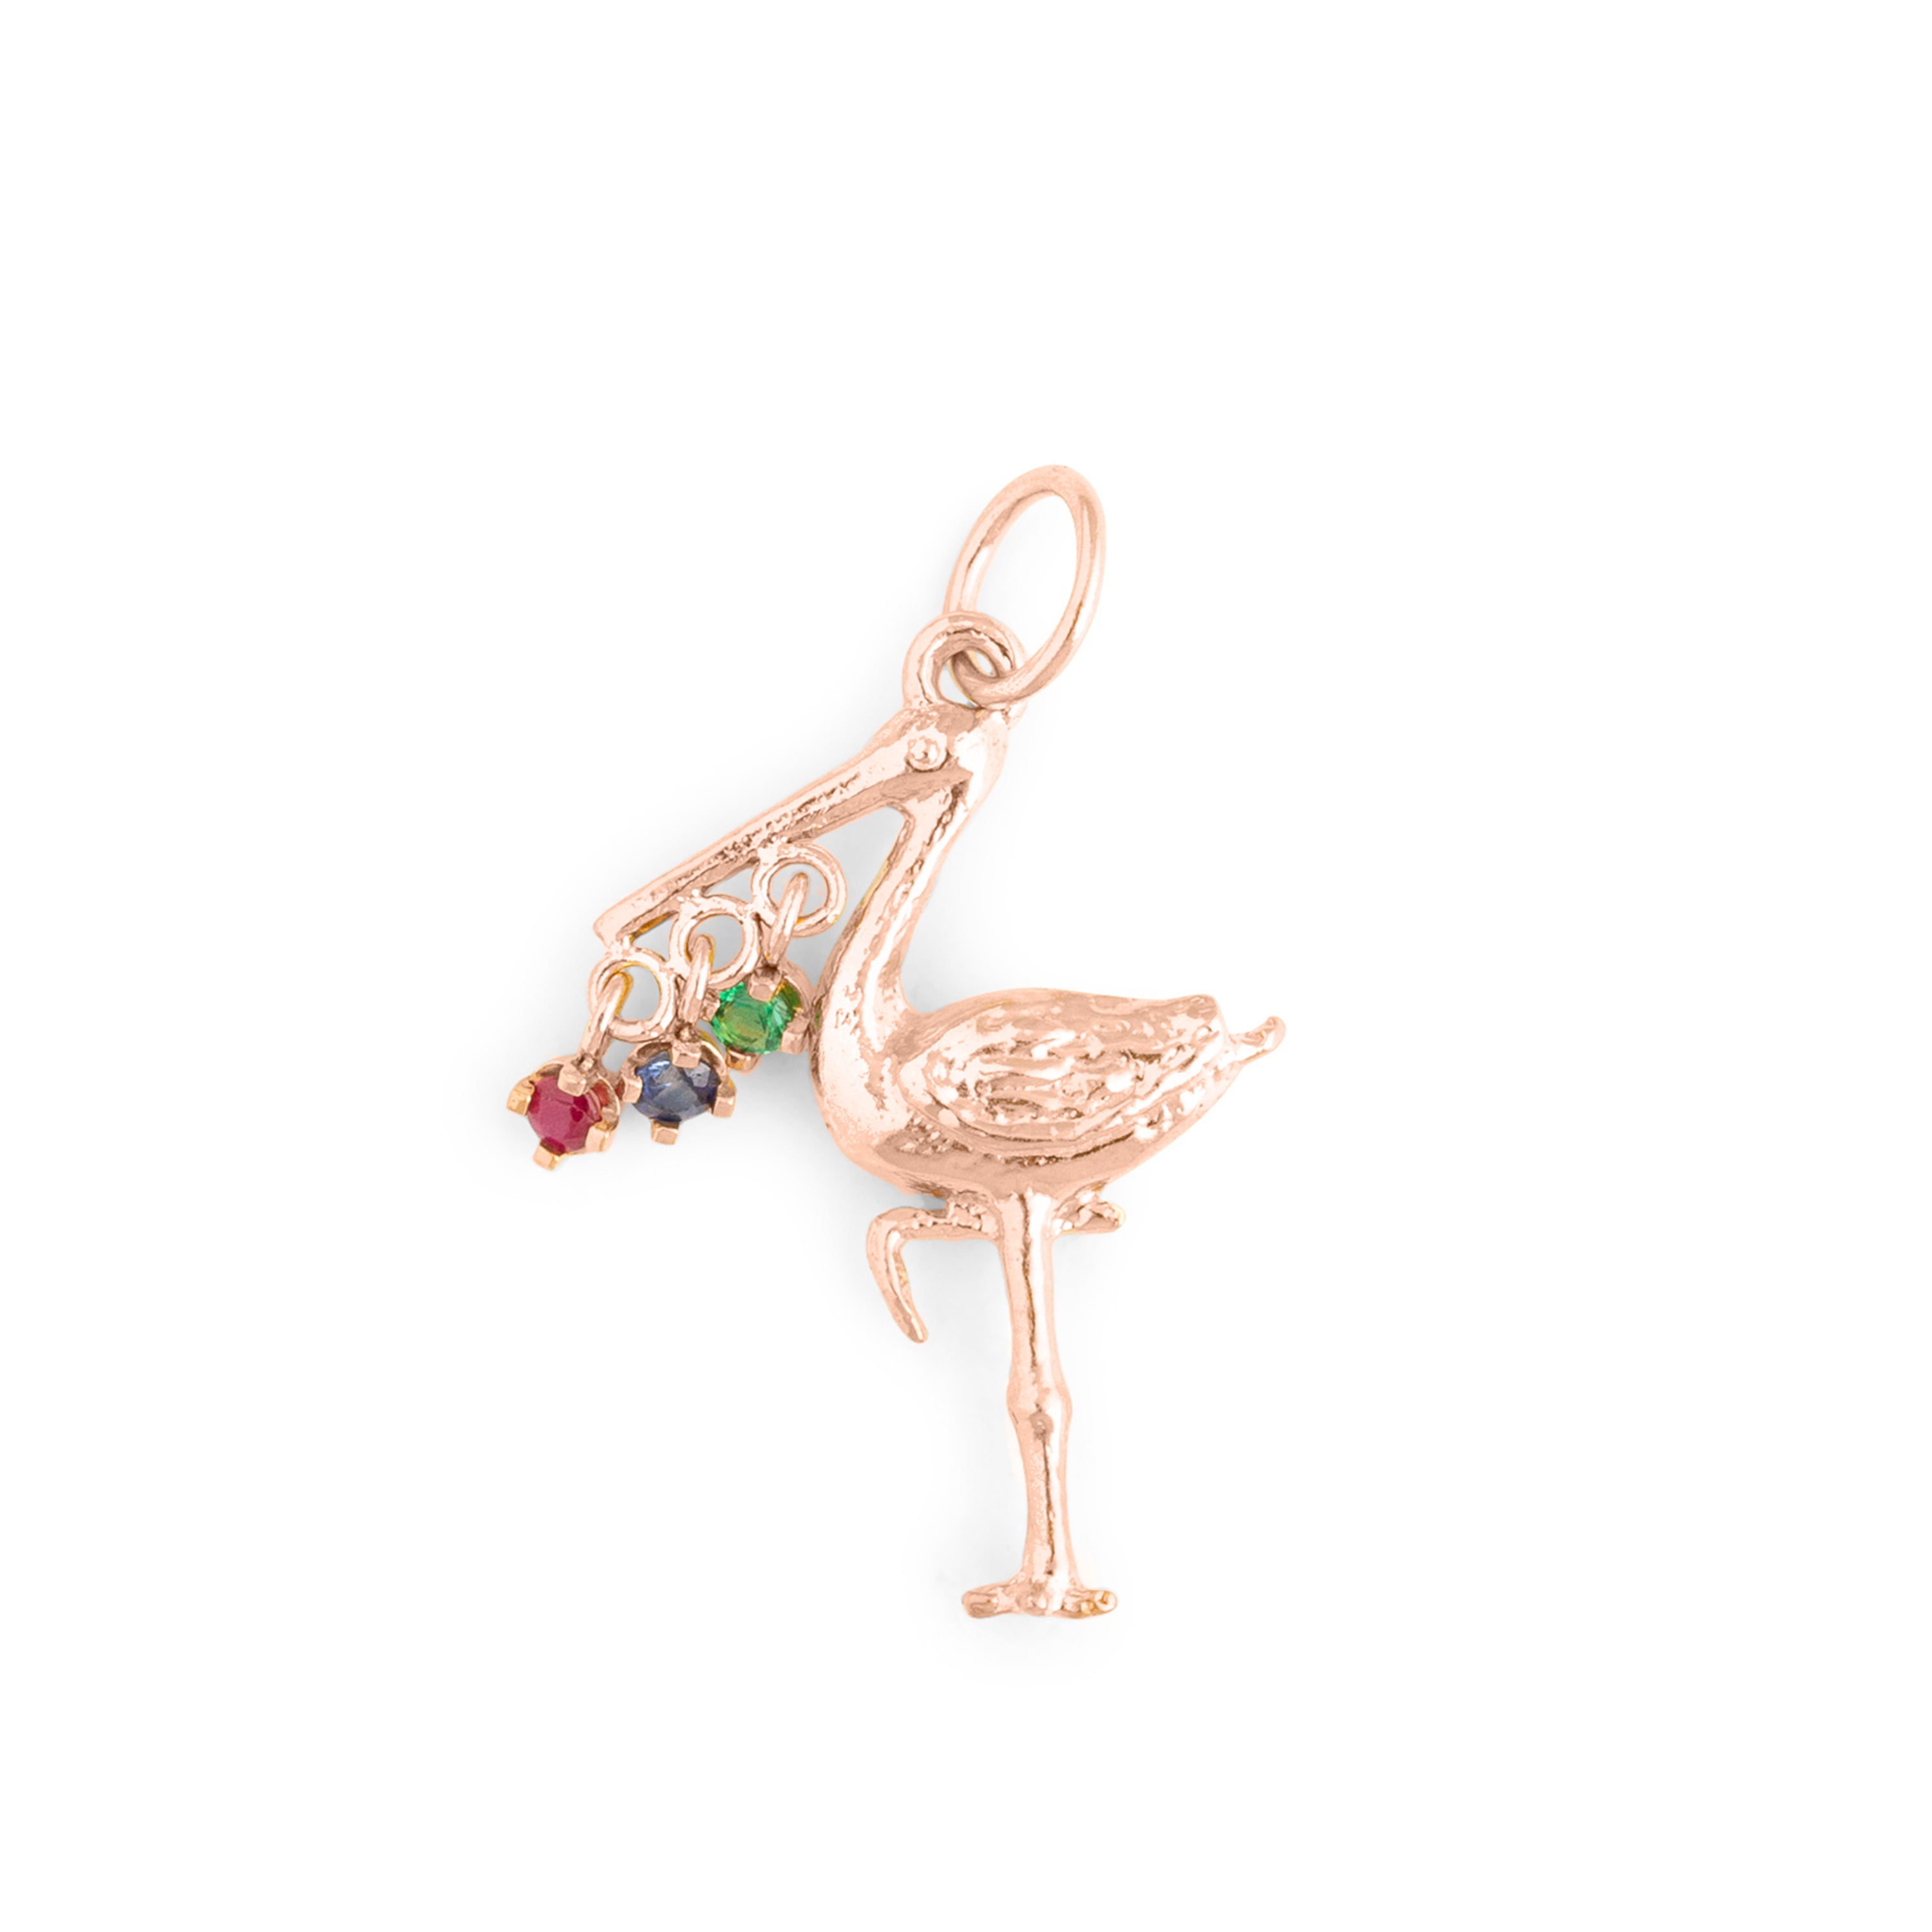 The F&B Rose Gold Birthstone Stork Necklace